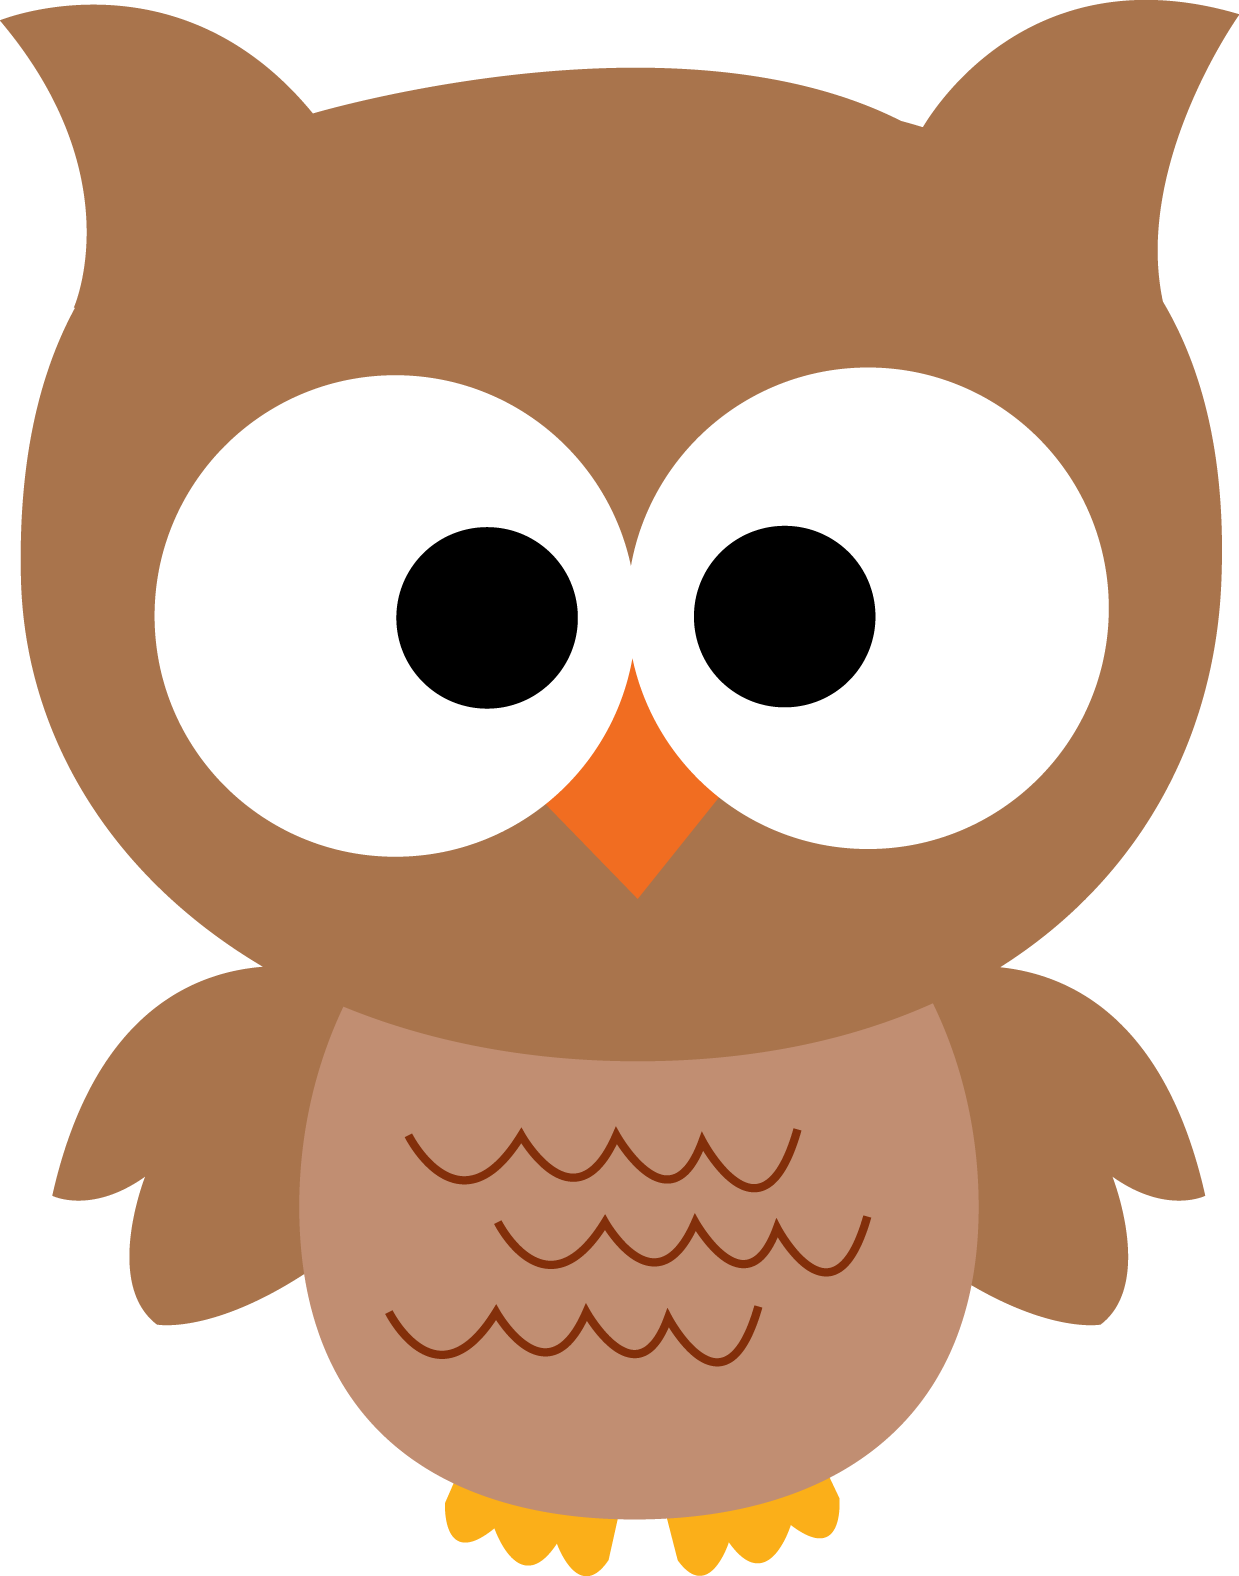 Clip art of owl free cartoon owl clipart by 6 cliparti owl